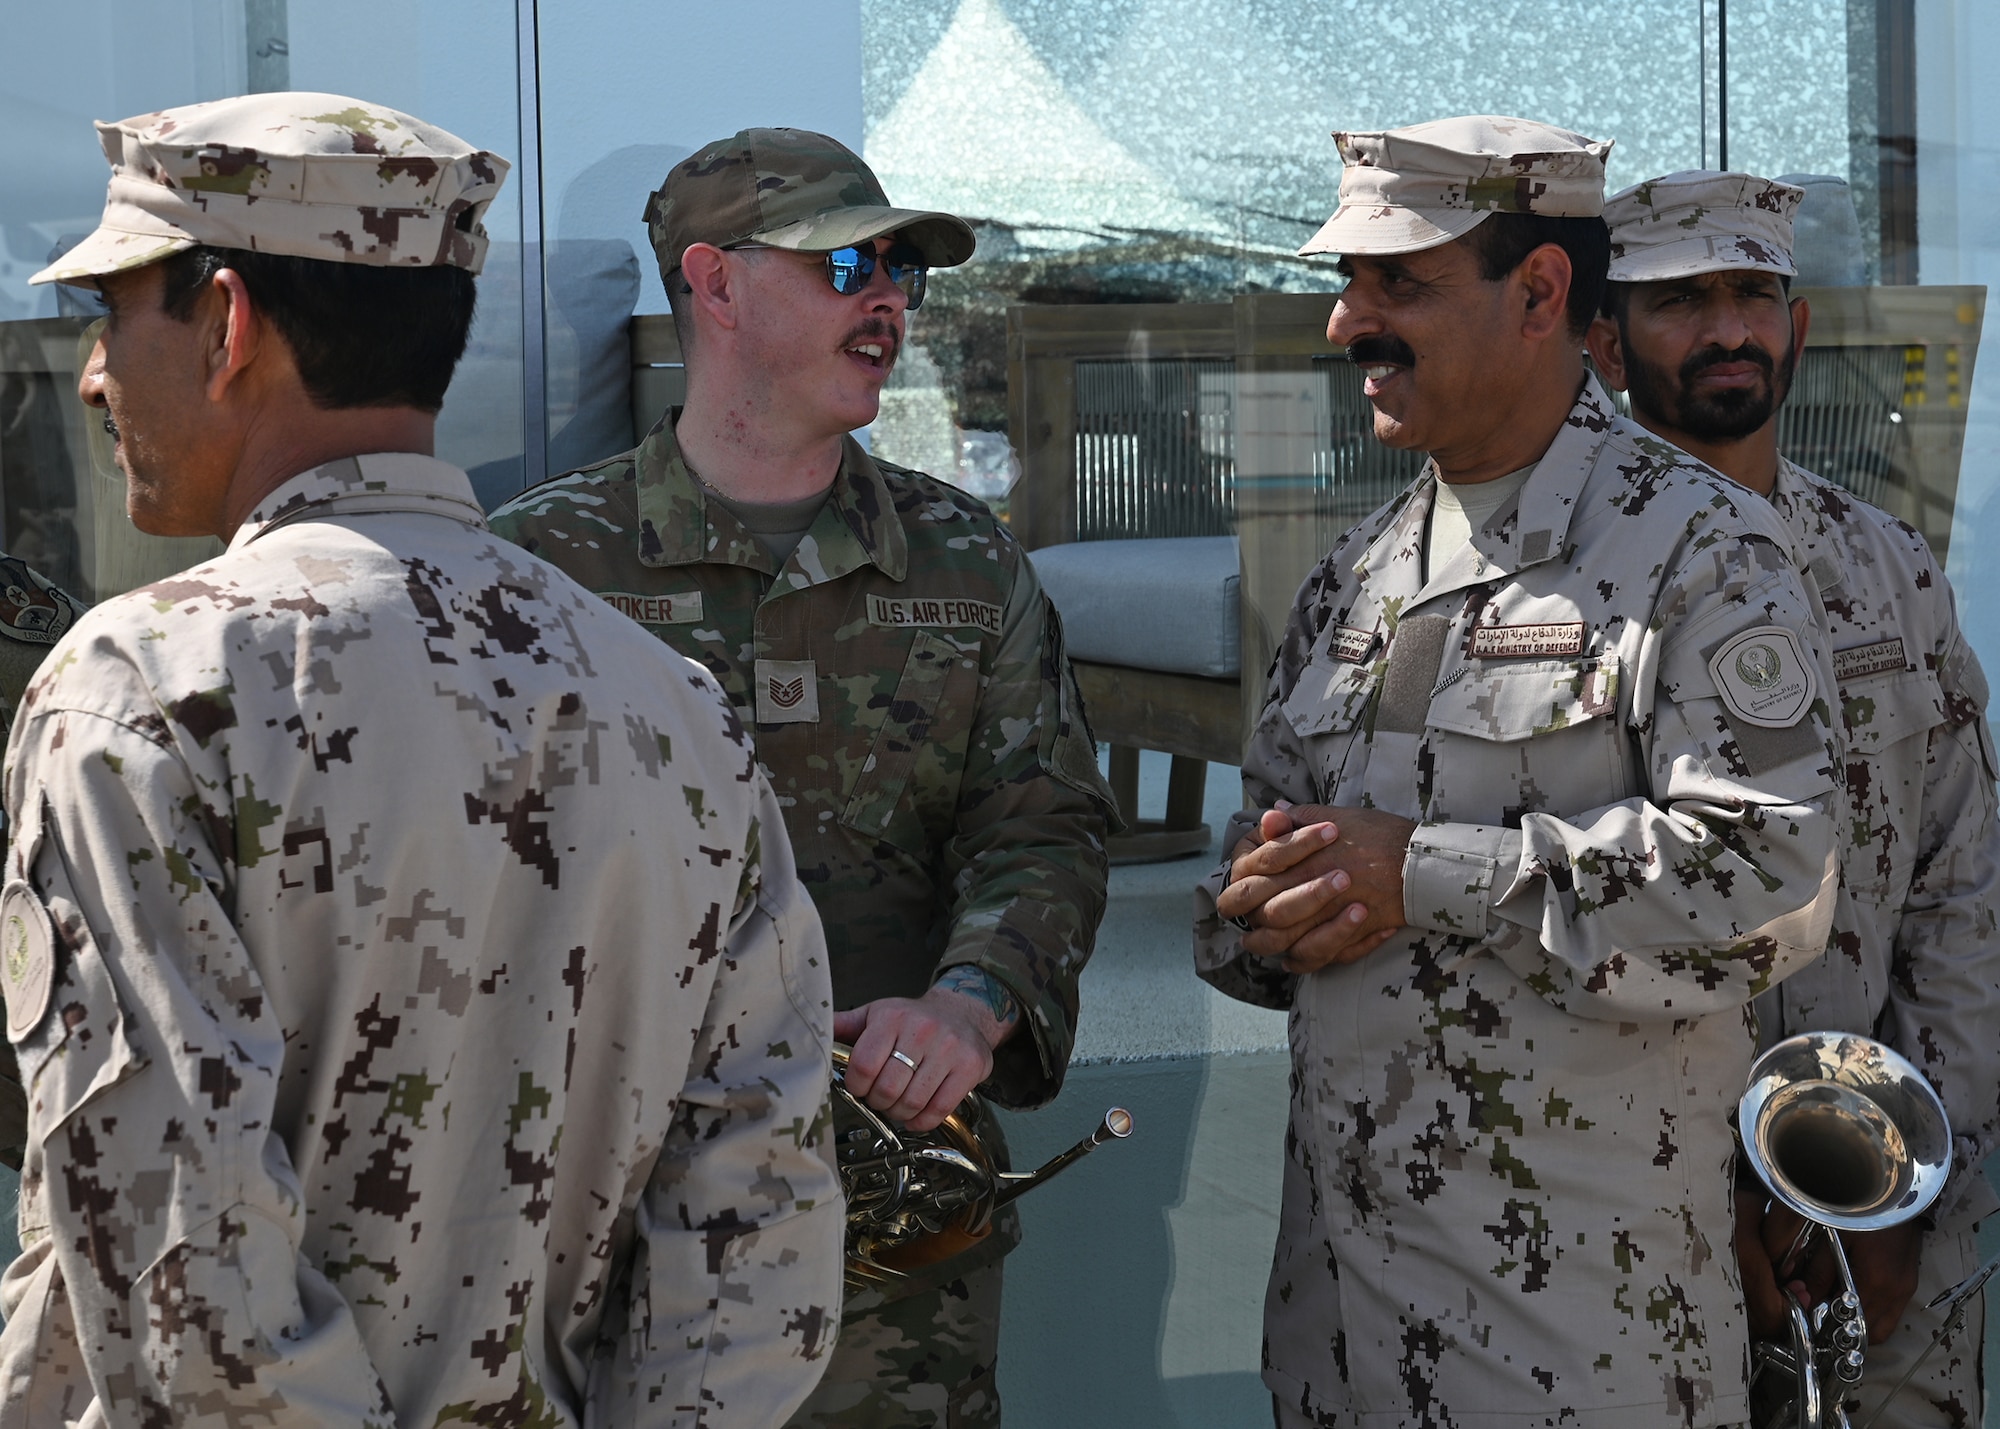 US and UAE services members interact.